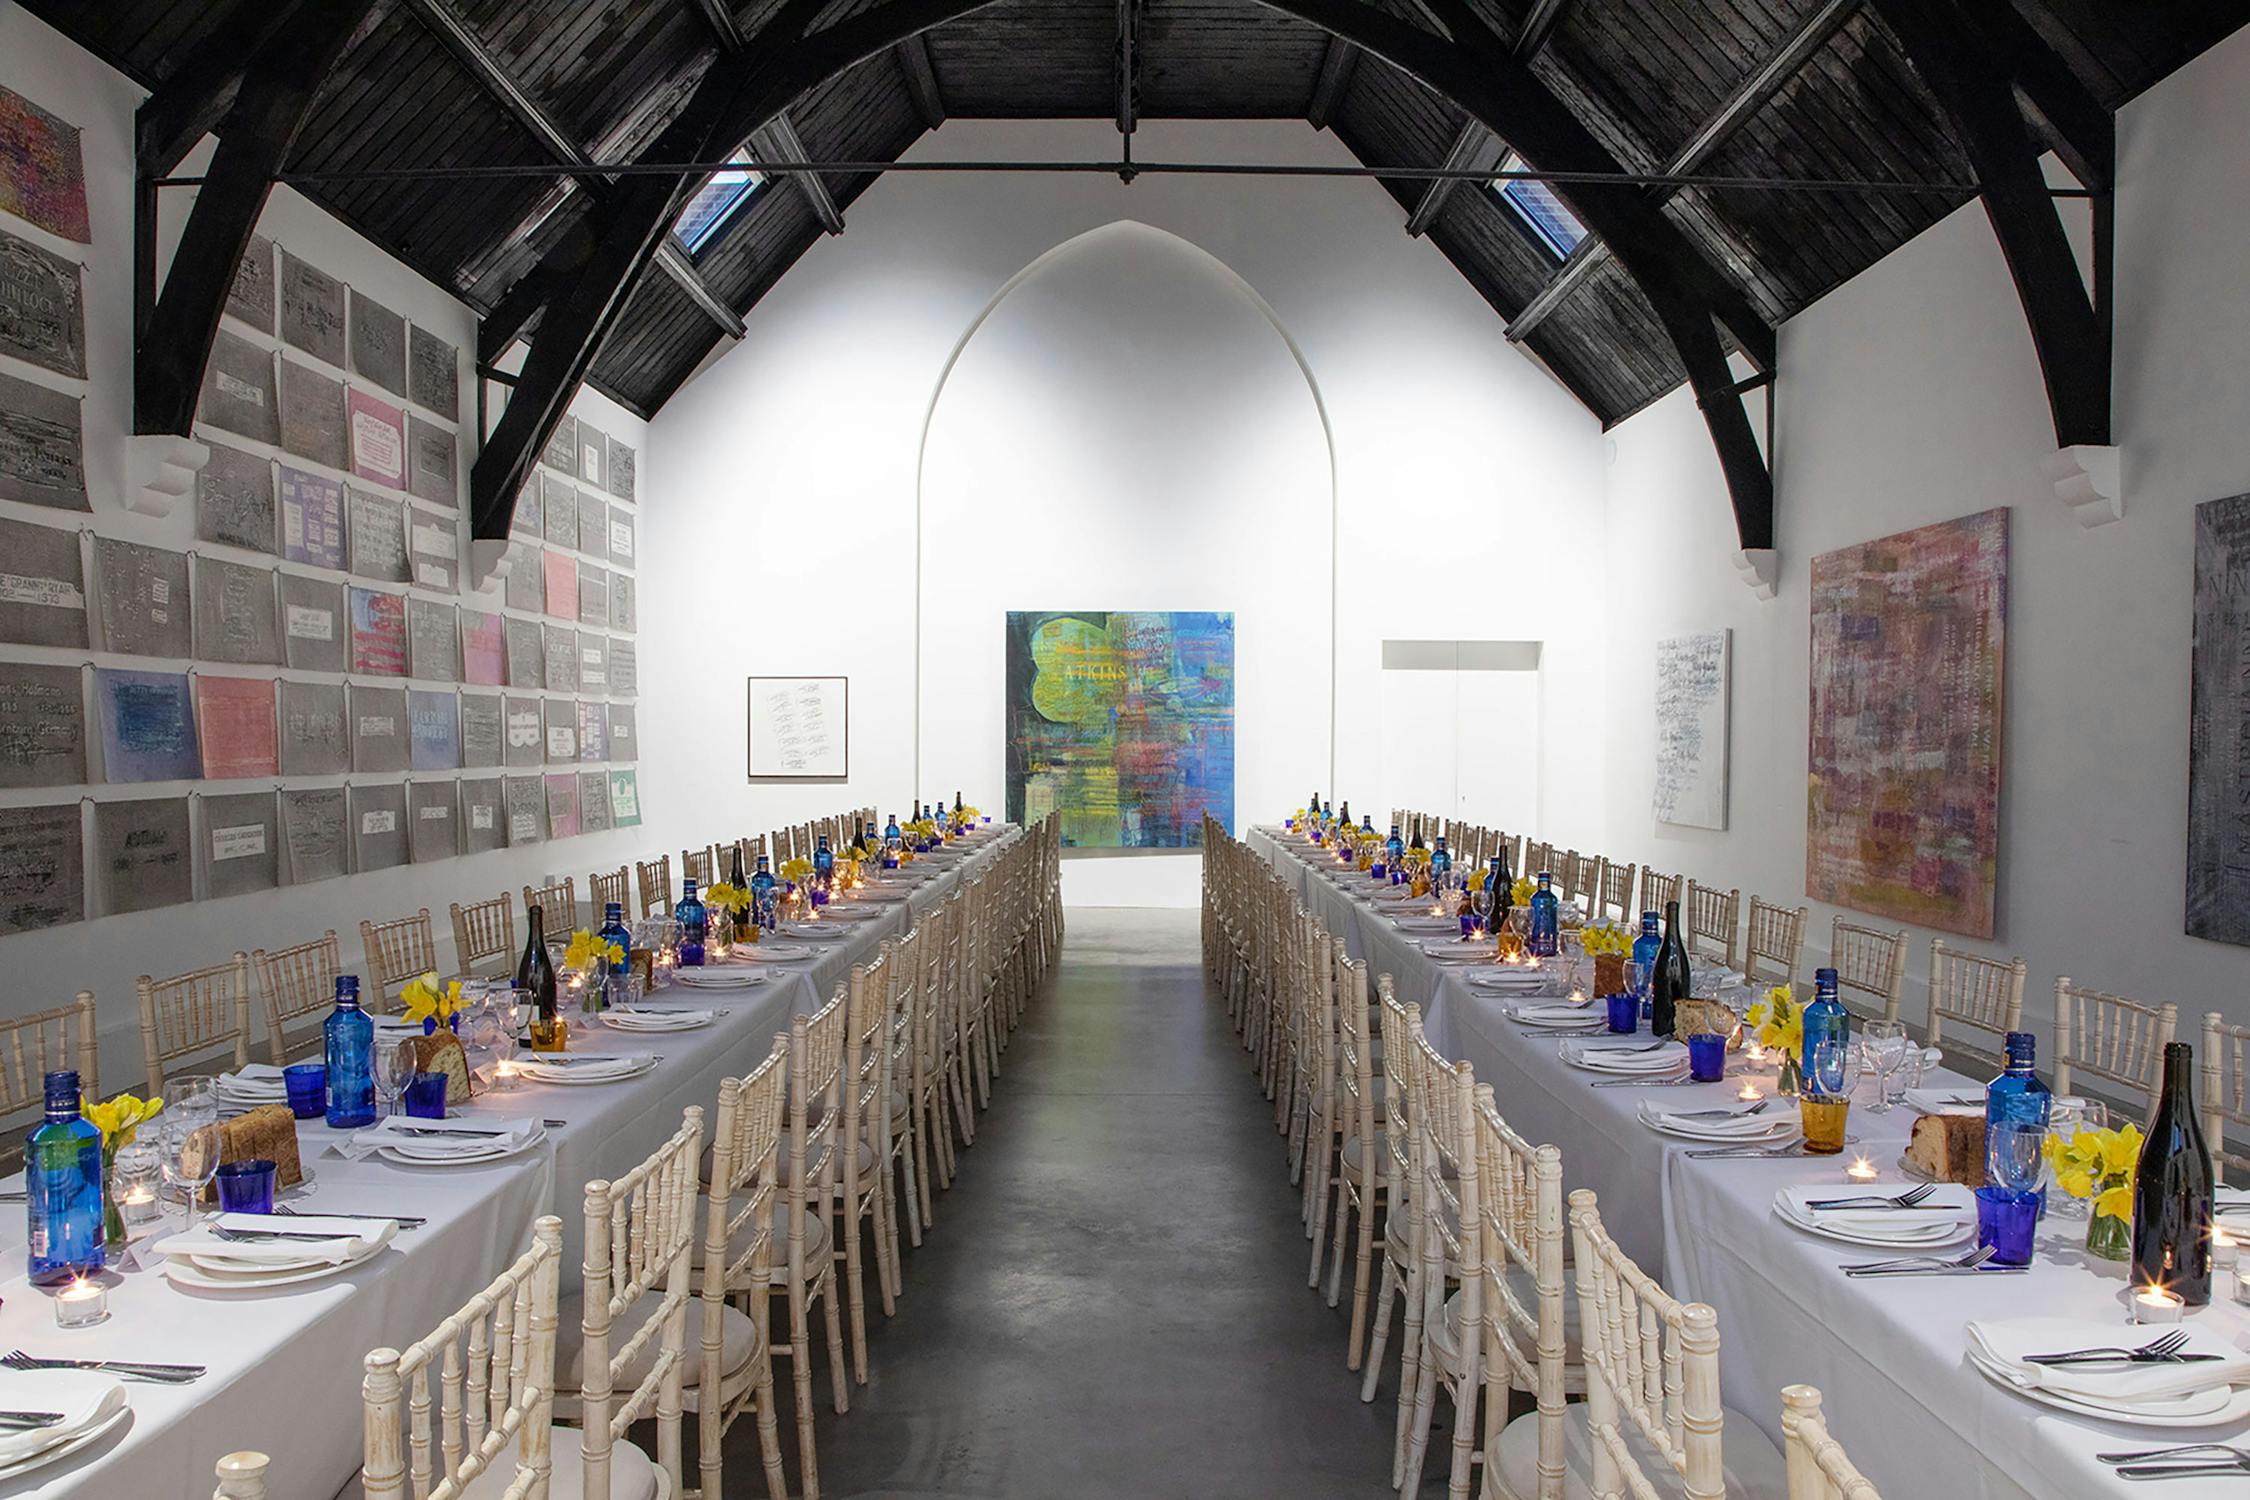 Studio Voltaire's vaulted gallery space featuring two long tables that span away from the camera. the tables are set with white table clothes, small bouquets of flowers, candles and colourful drinking glasses.